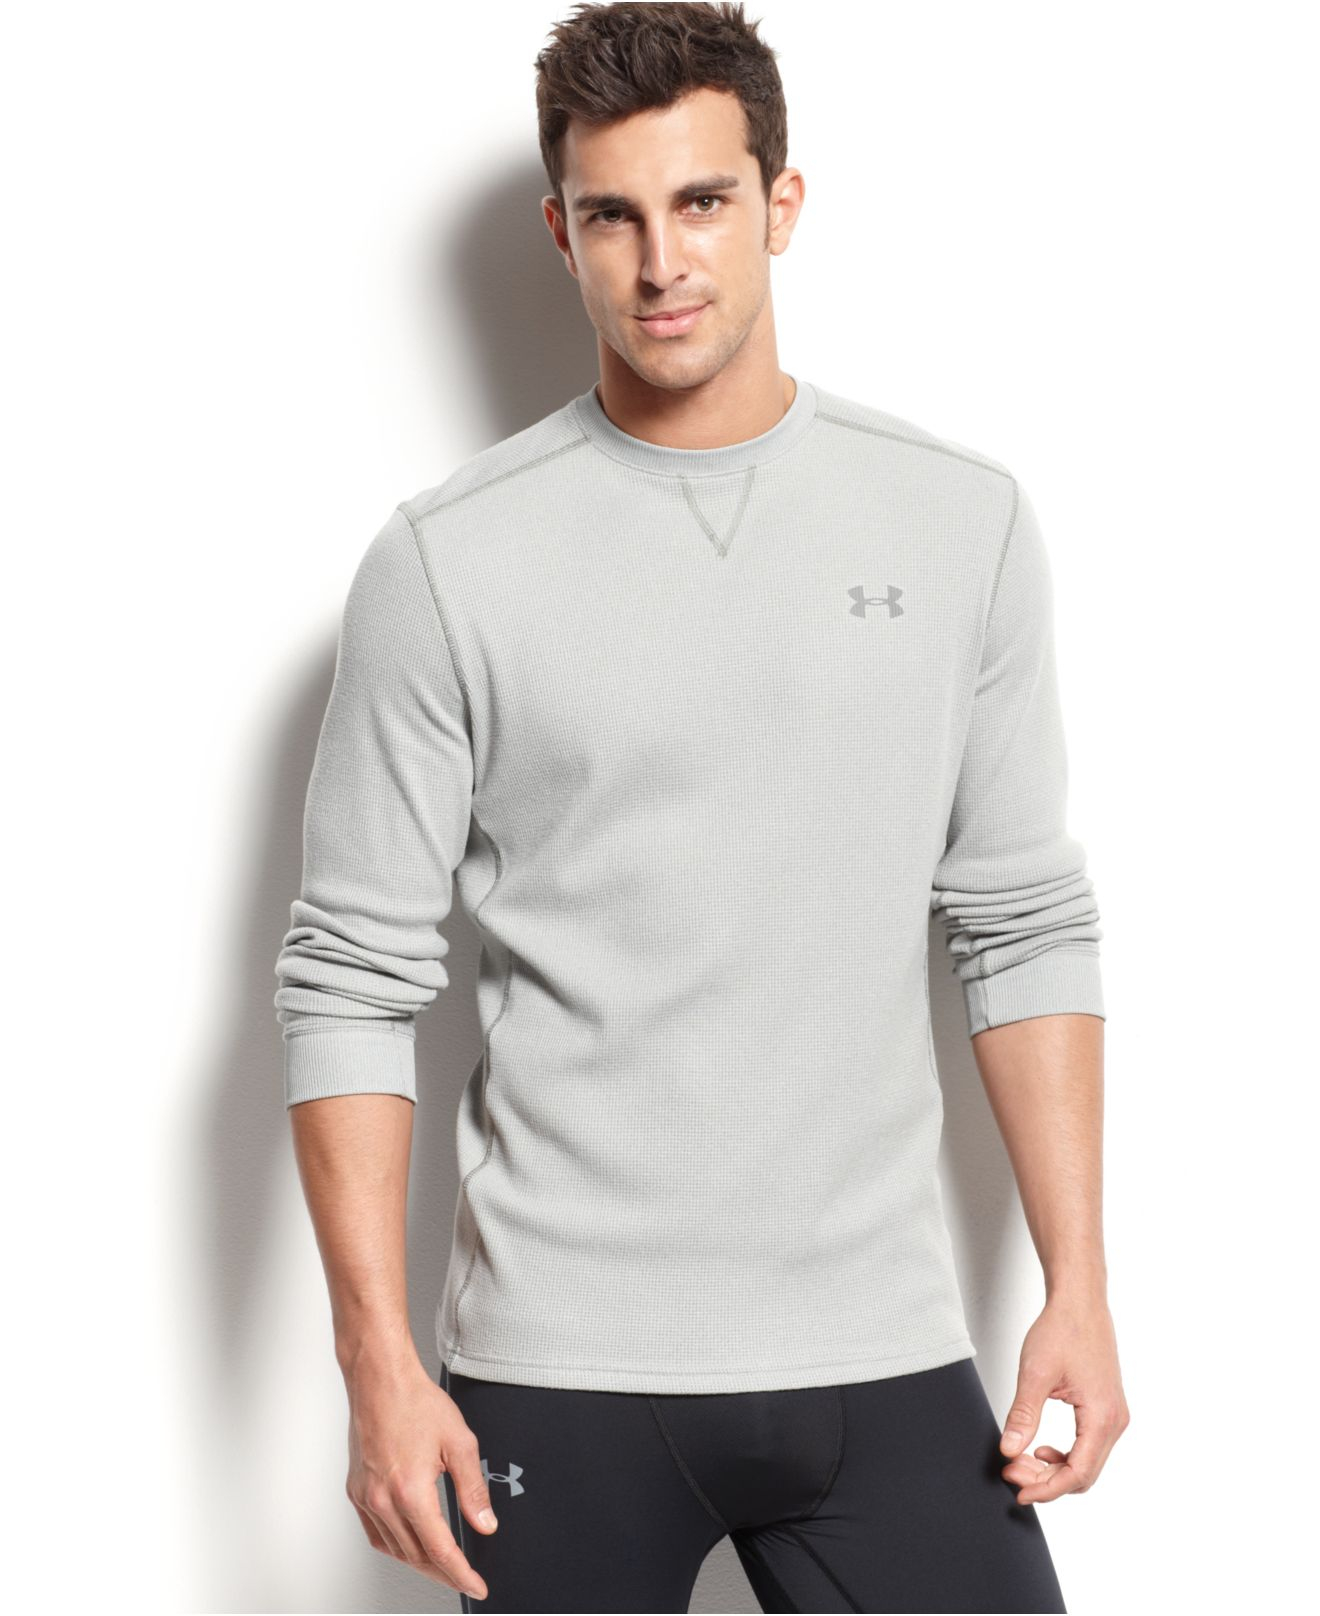 Under Armour Thermal Long Sleeve Sale Online, SAVE 58%.